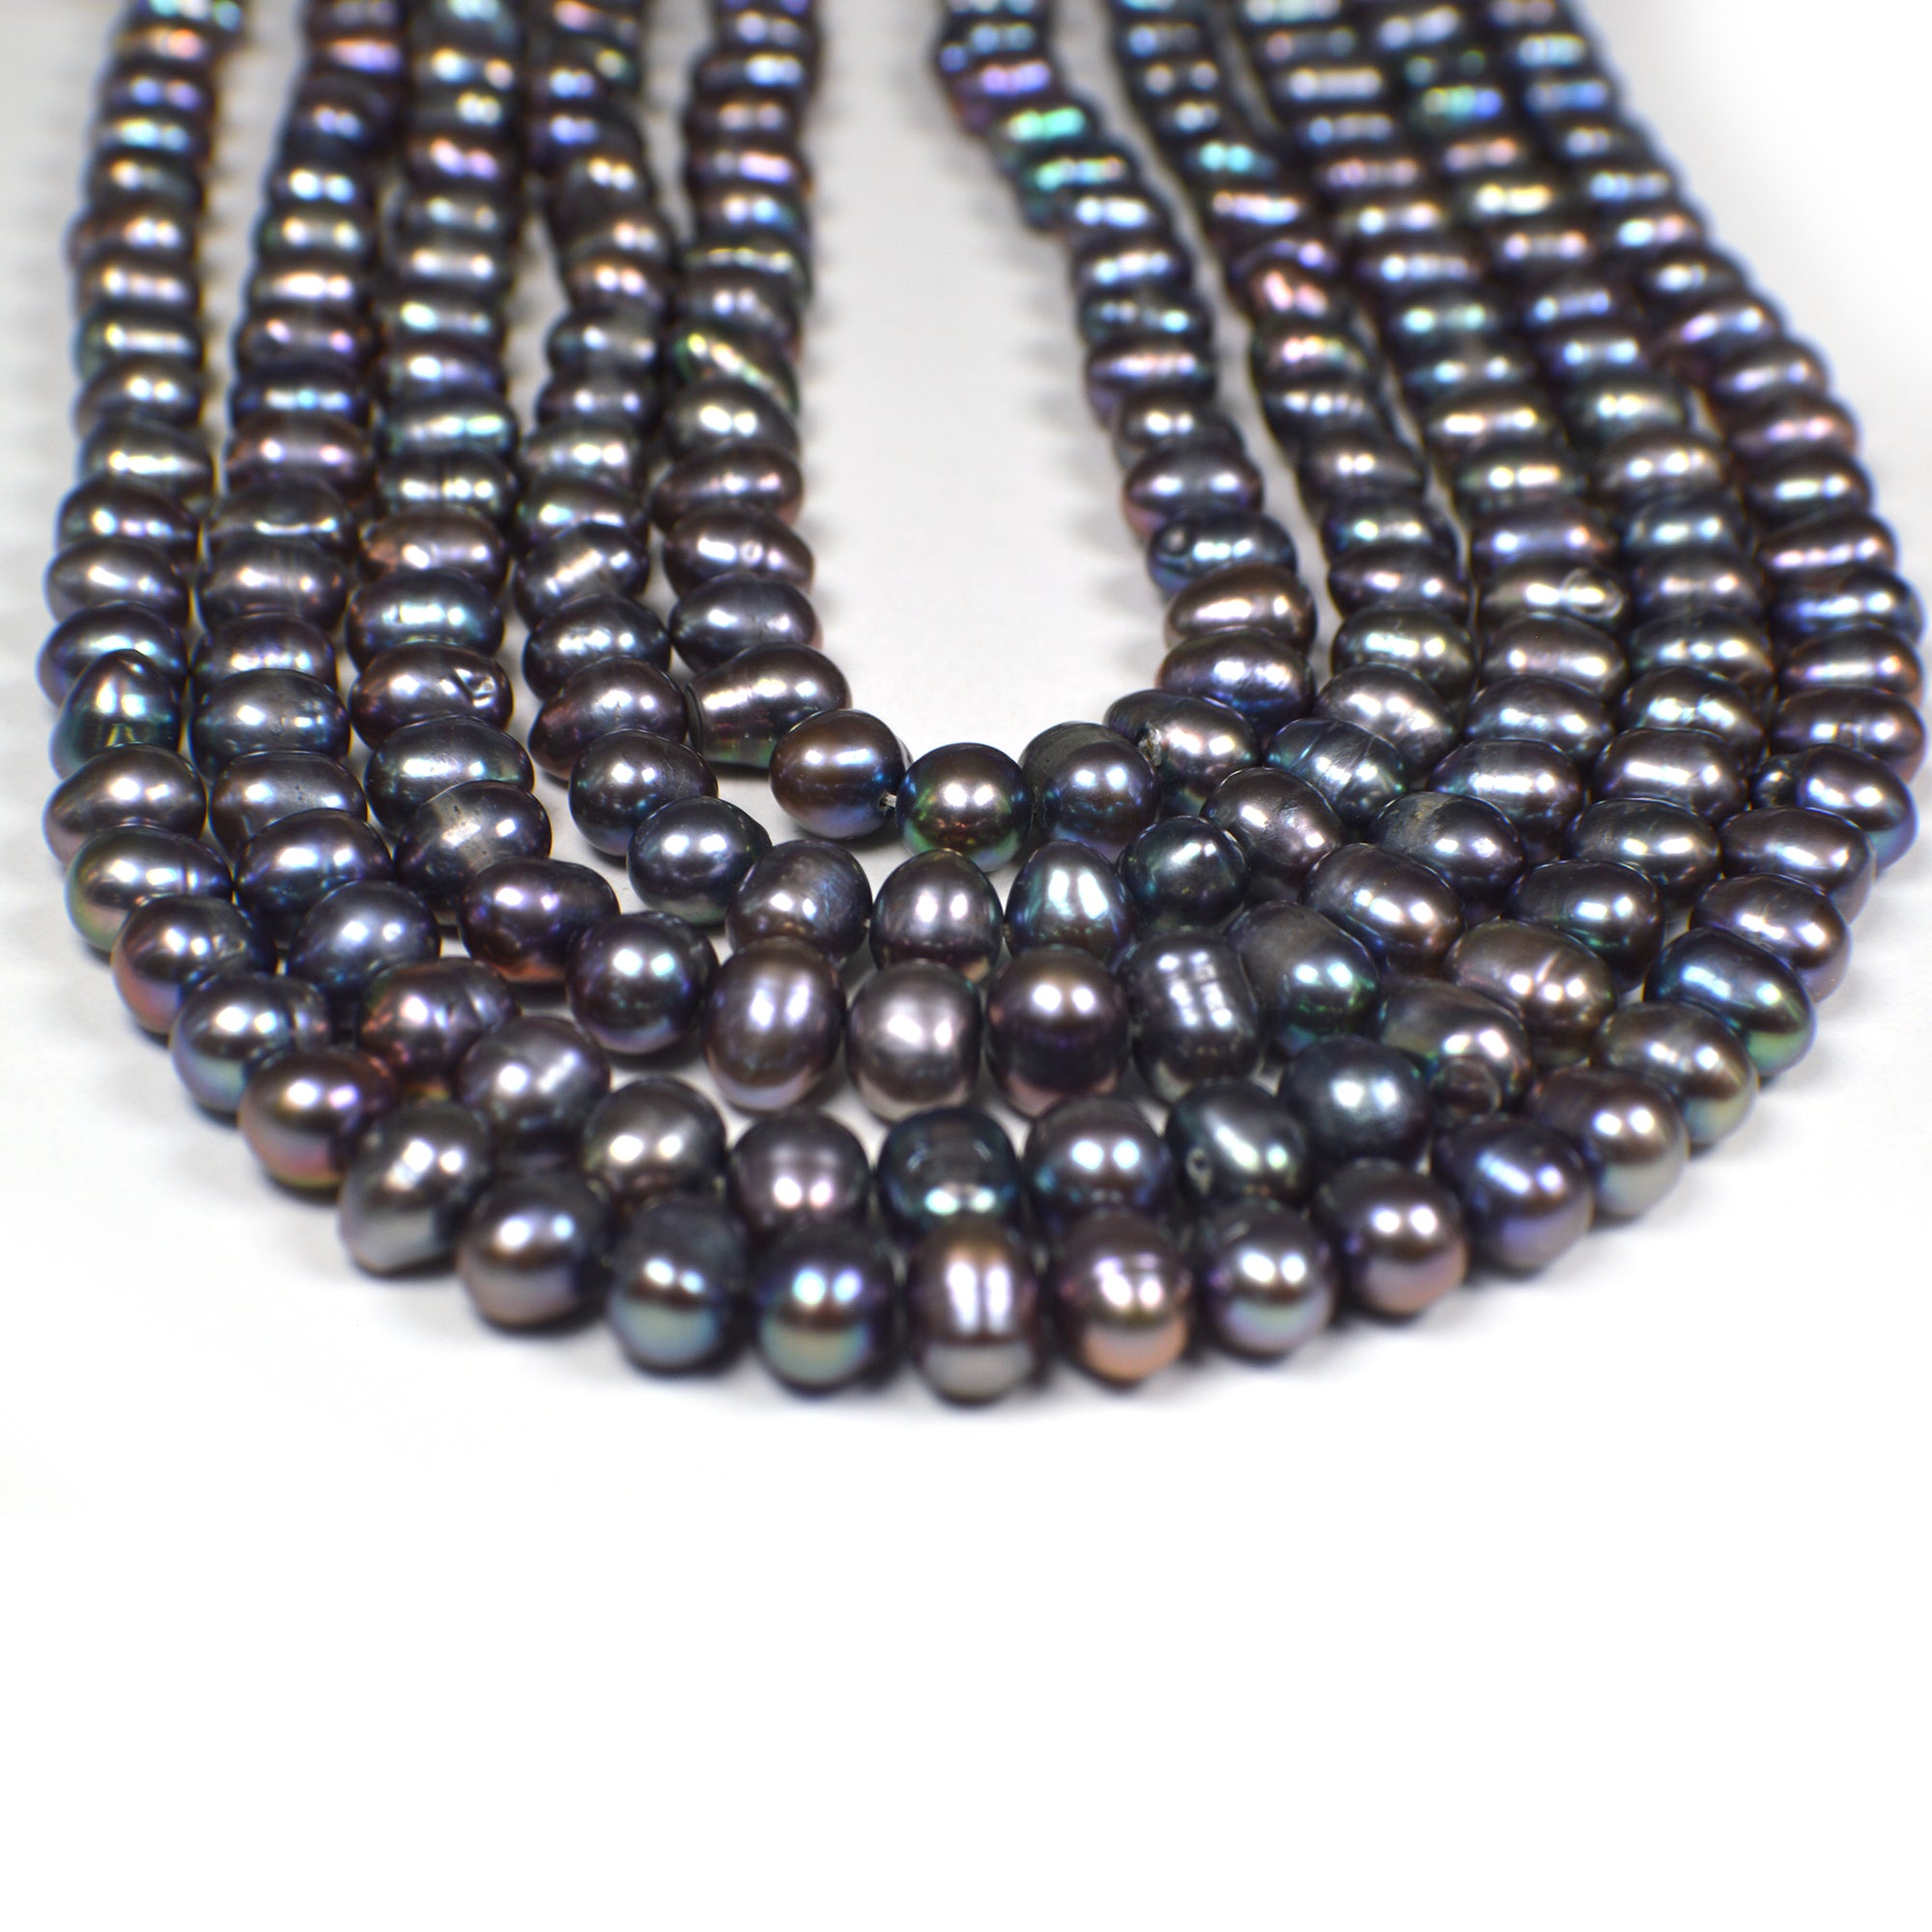 7 - 8 MM Peacock Navy Blue Potato Freshwater Pearls Beads